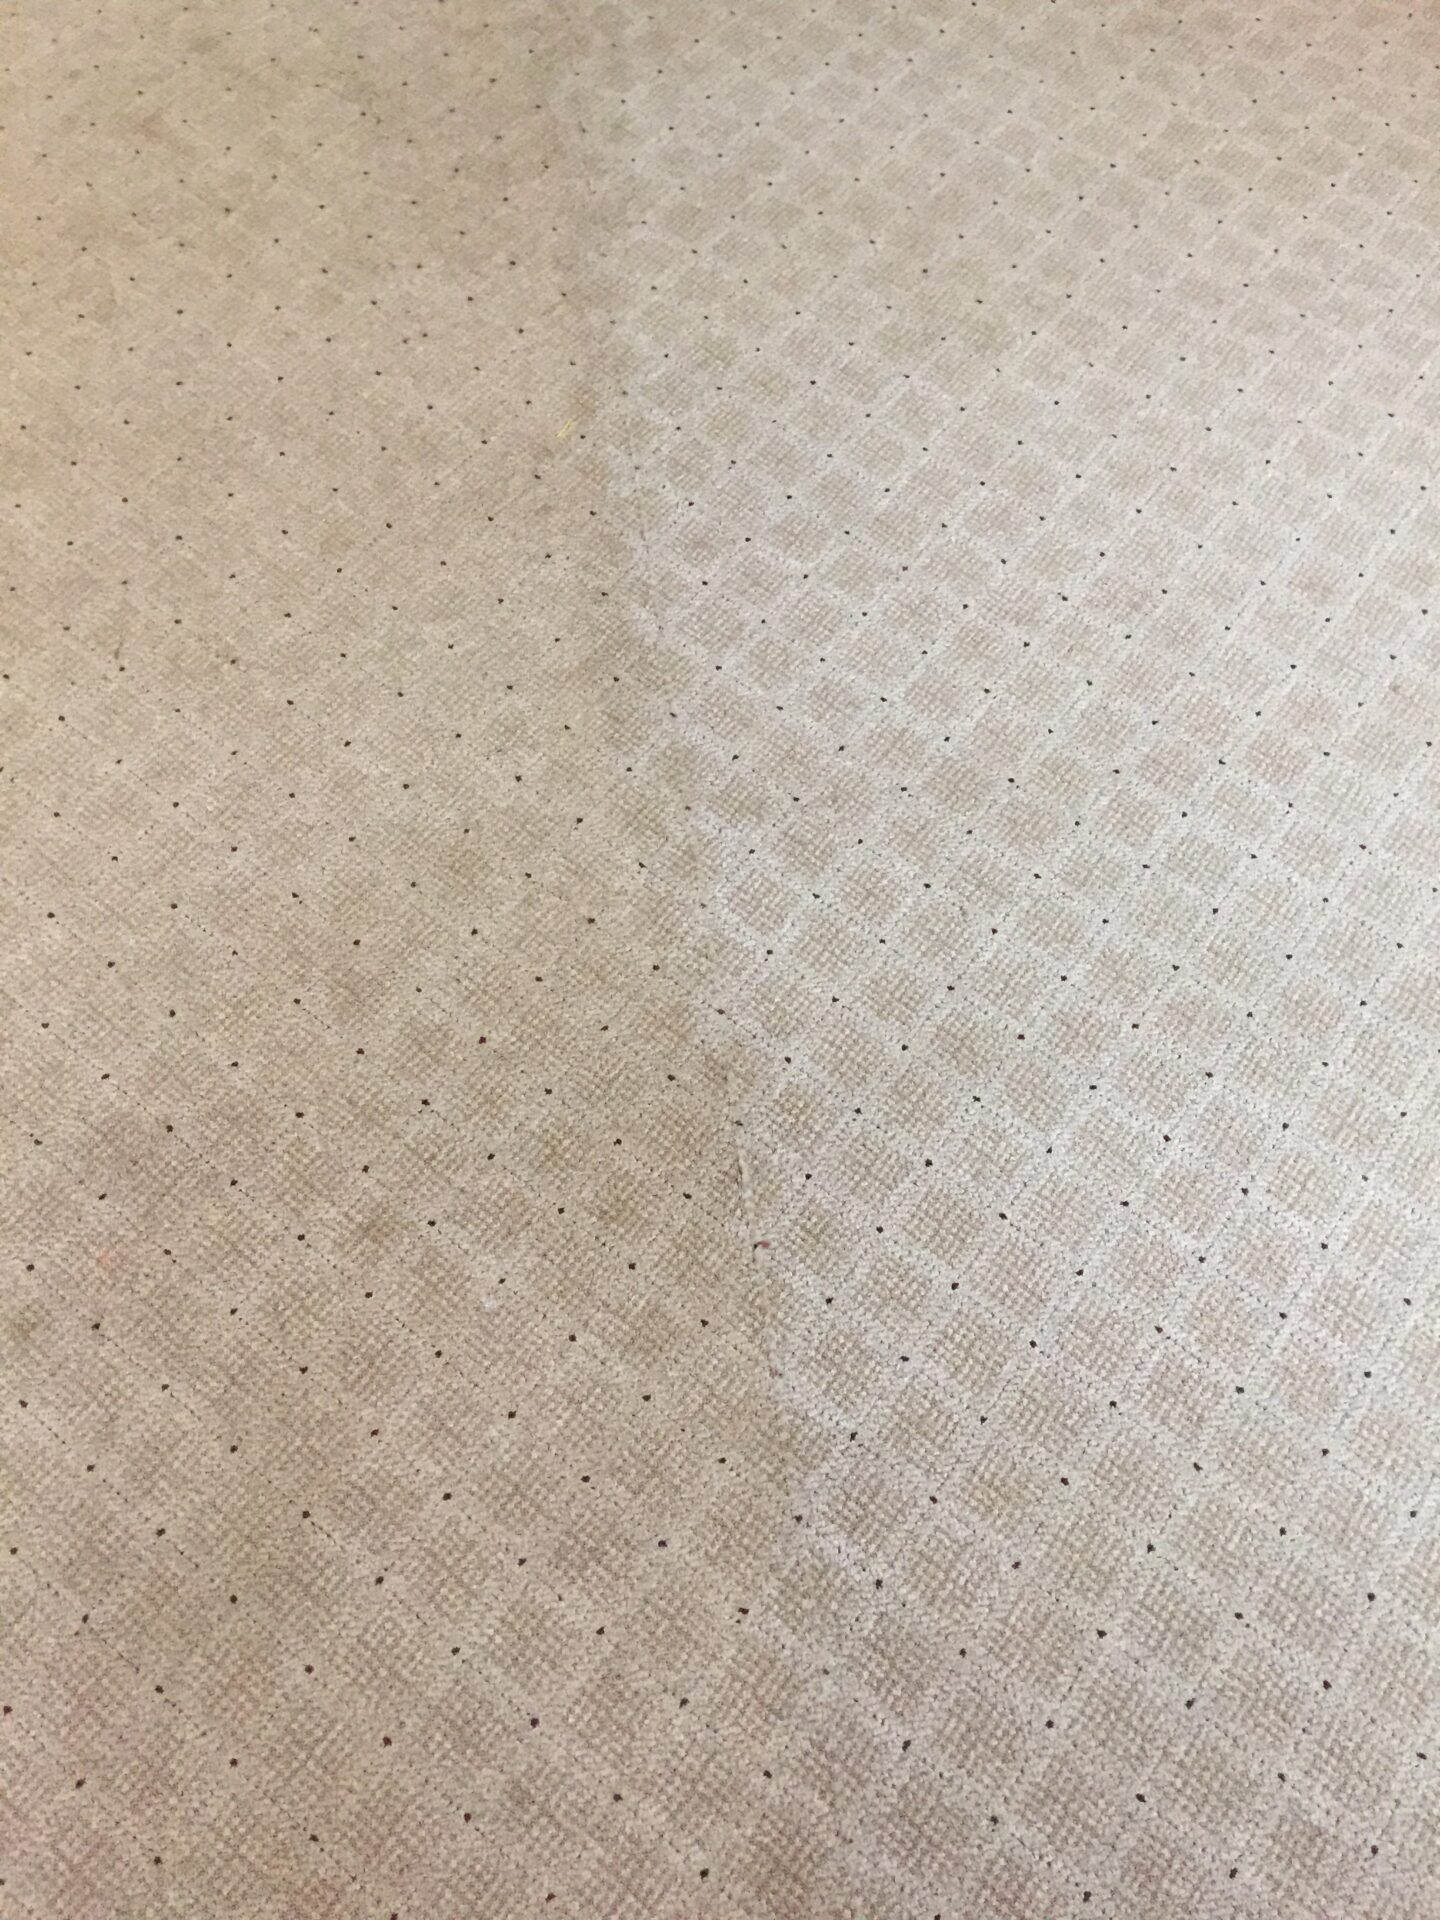 A closeup look at a well cleaned floor of a house